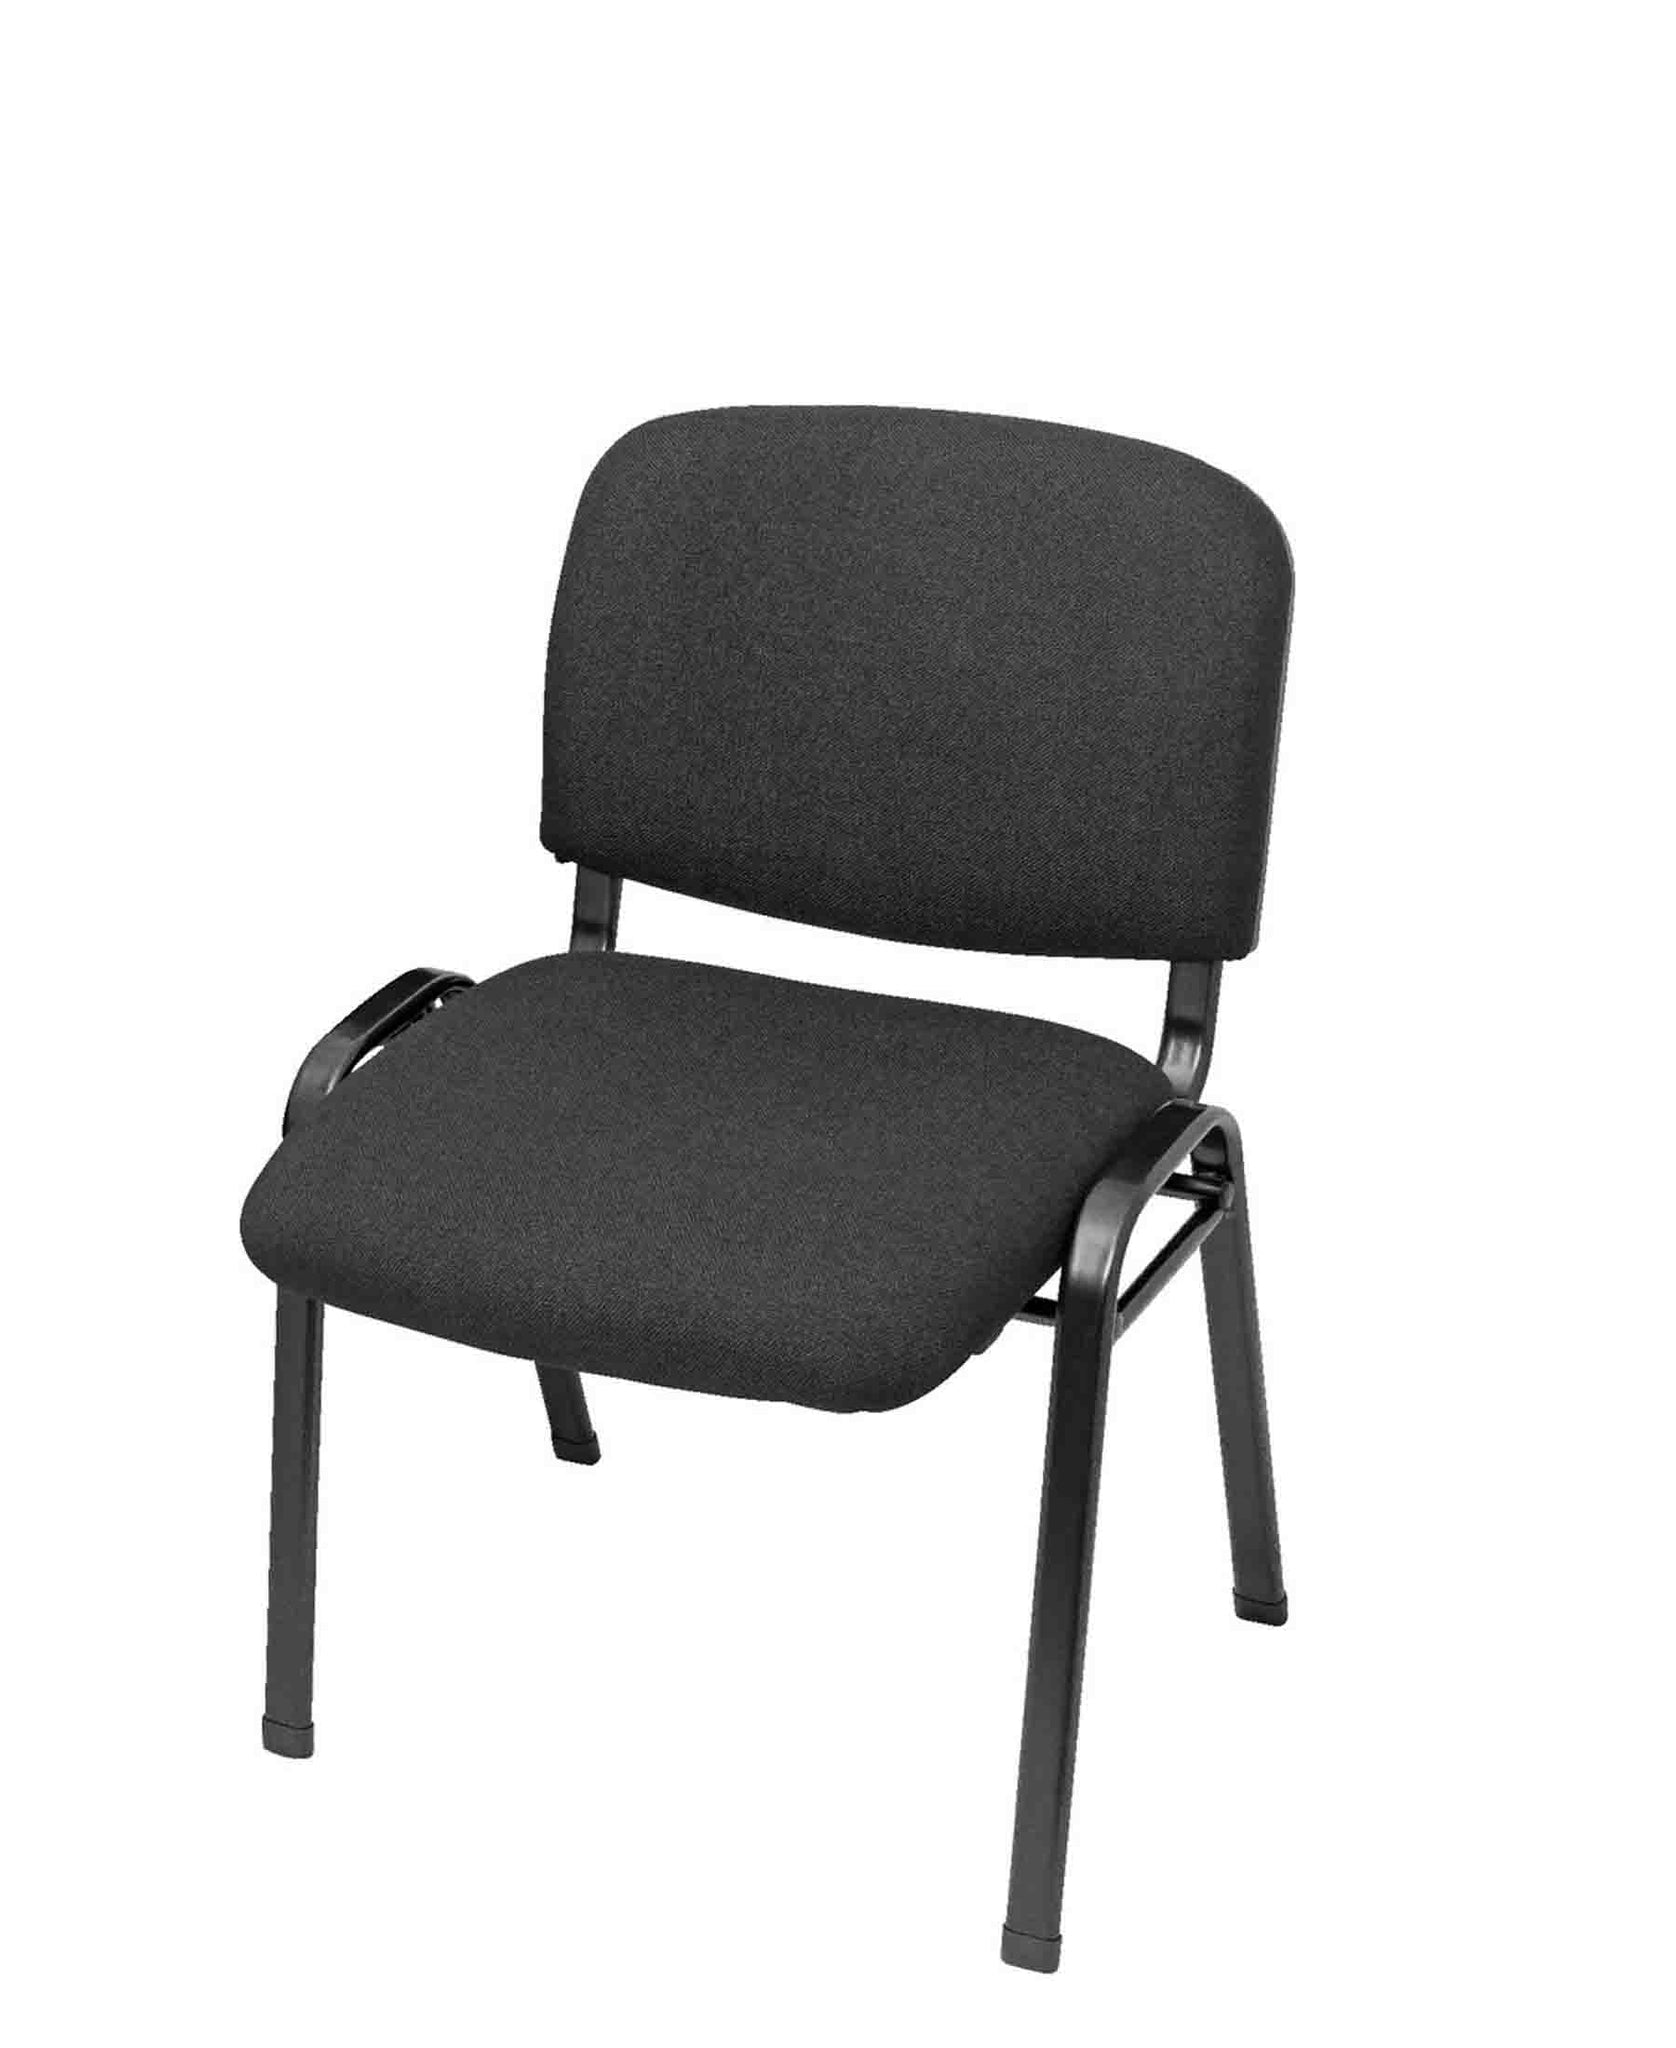 The Office Visitor’s Chair - Black